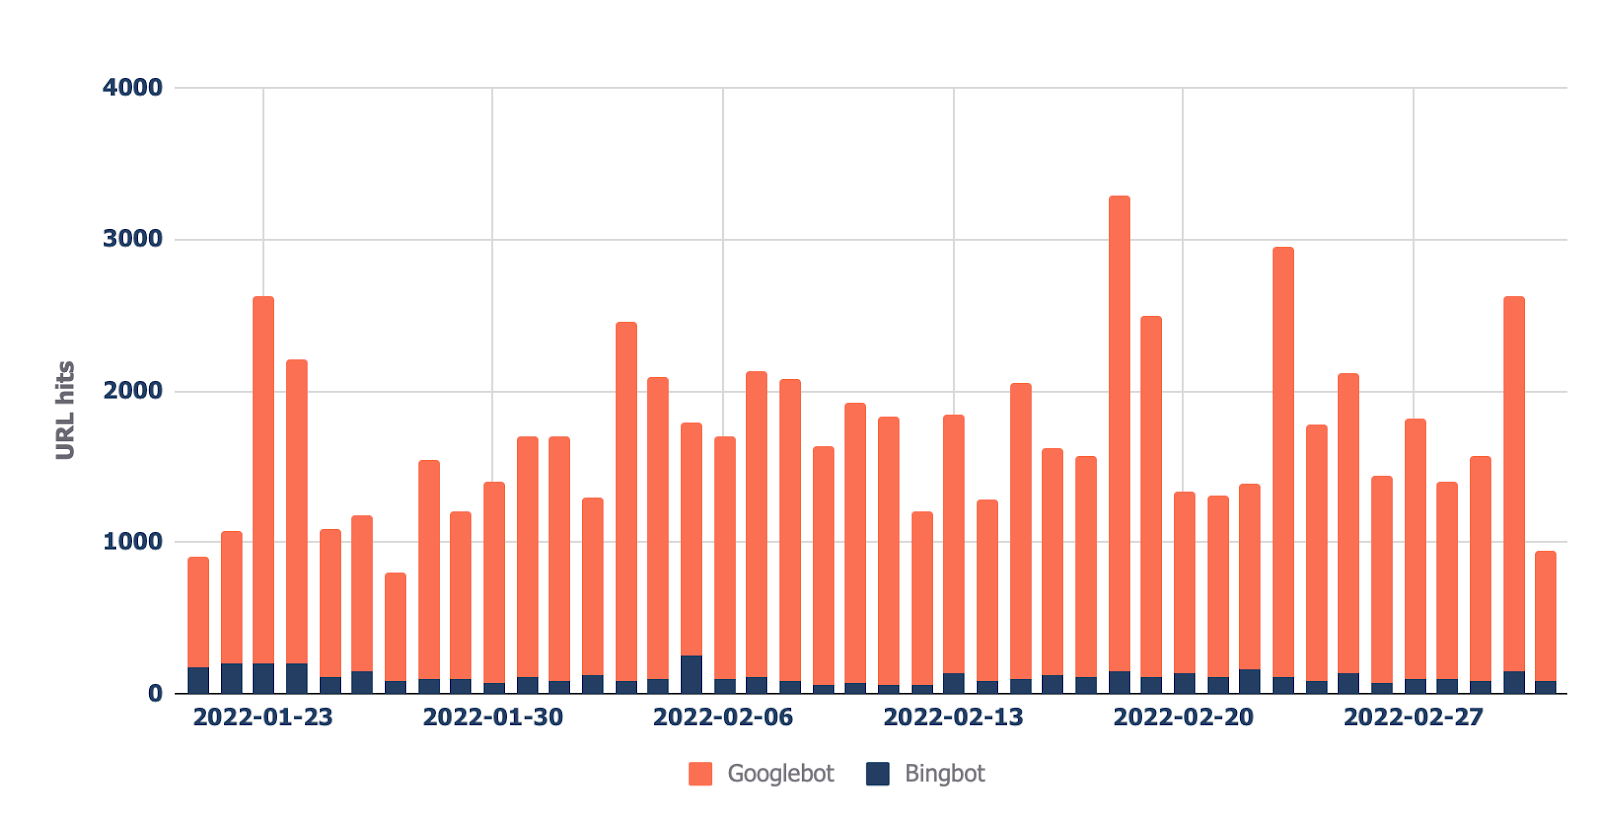 Stacked bar chart showing how crawl trend changes over time